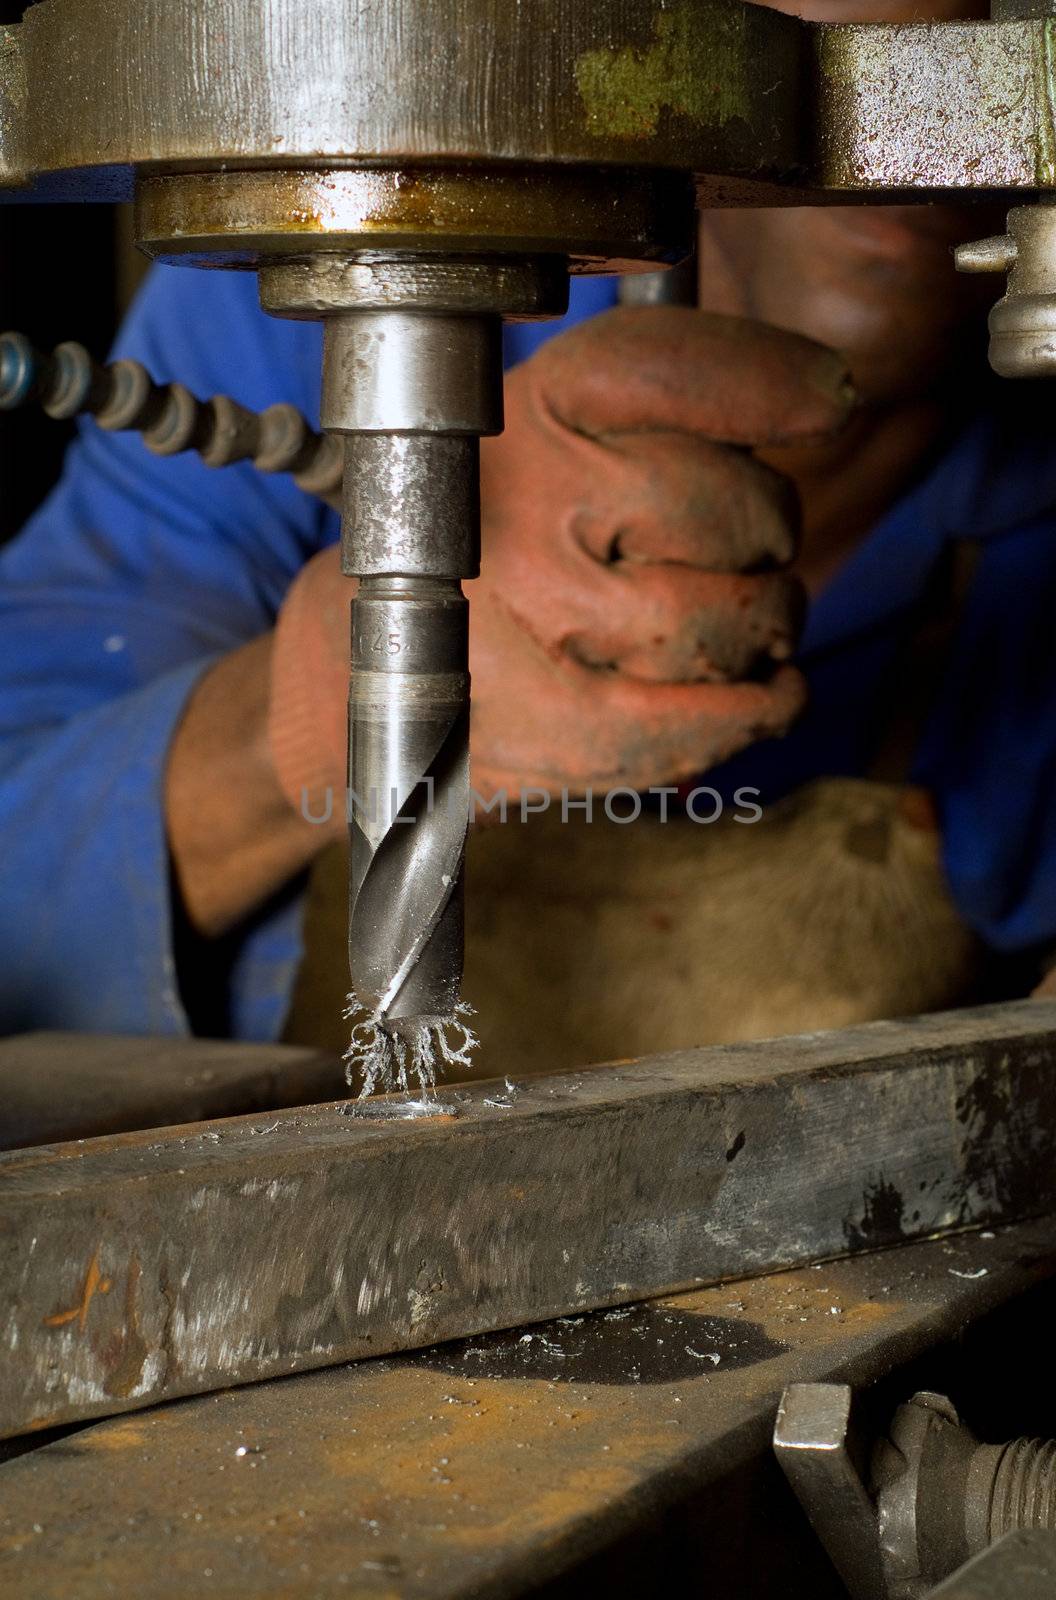 South African or American worker engineer working with industrial drill press